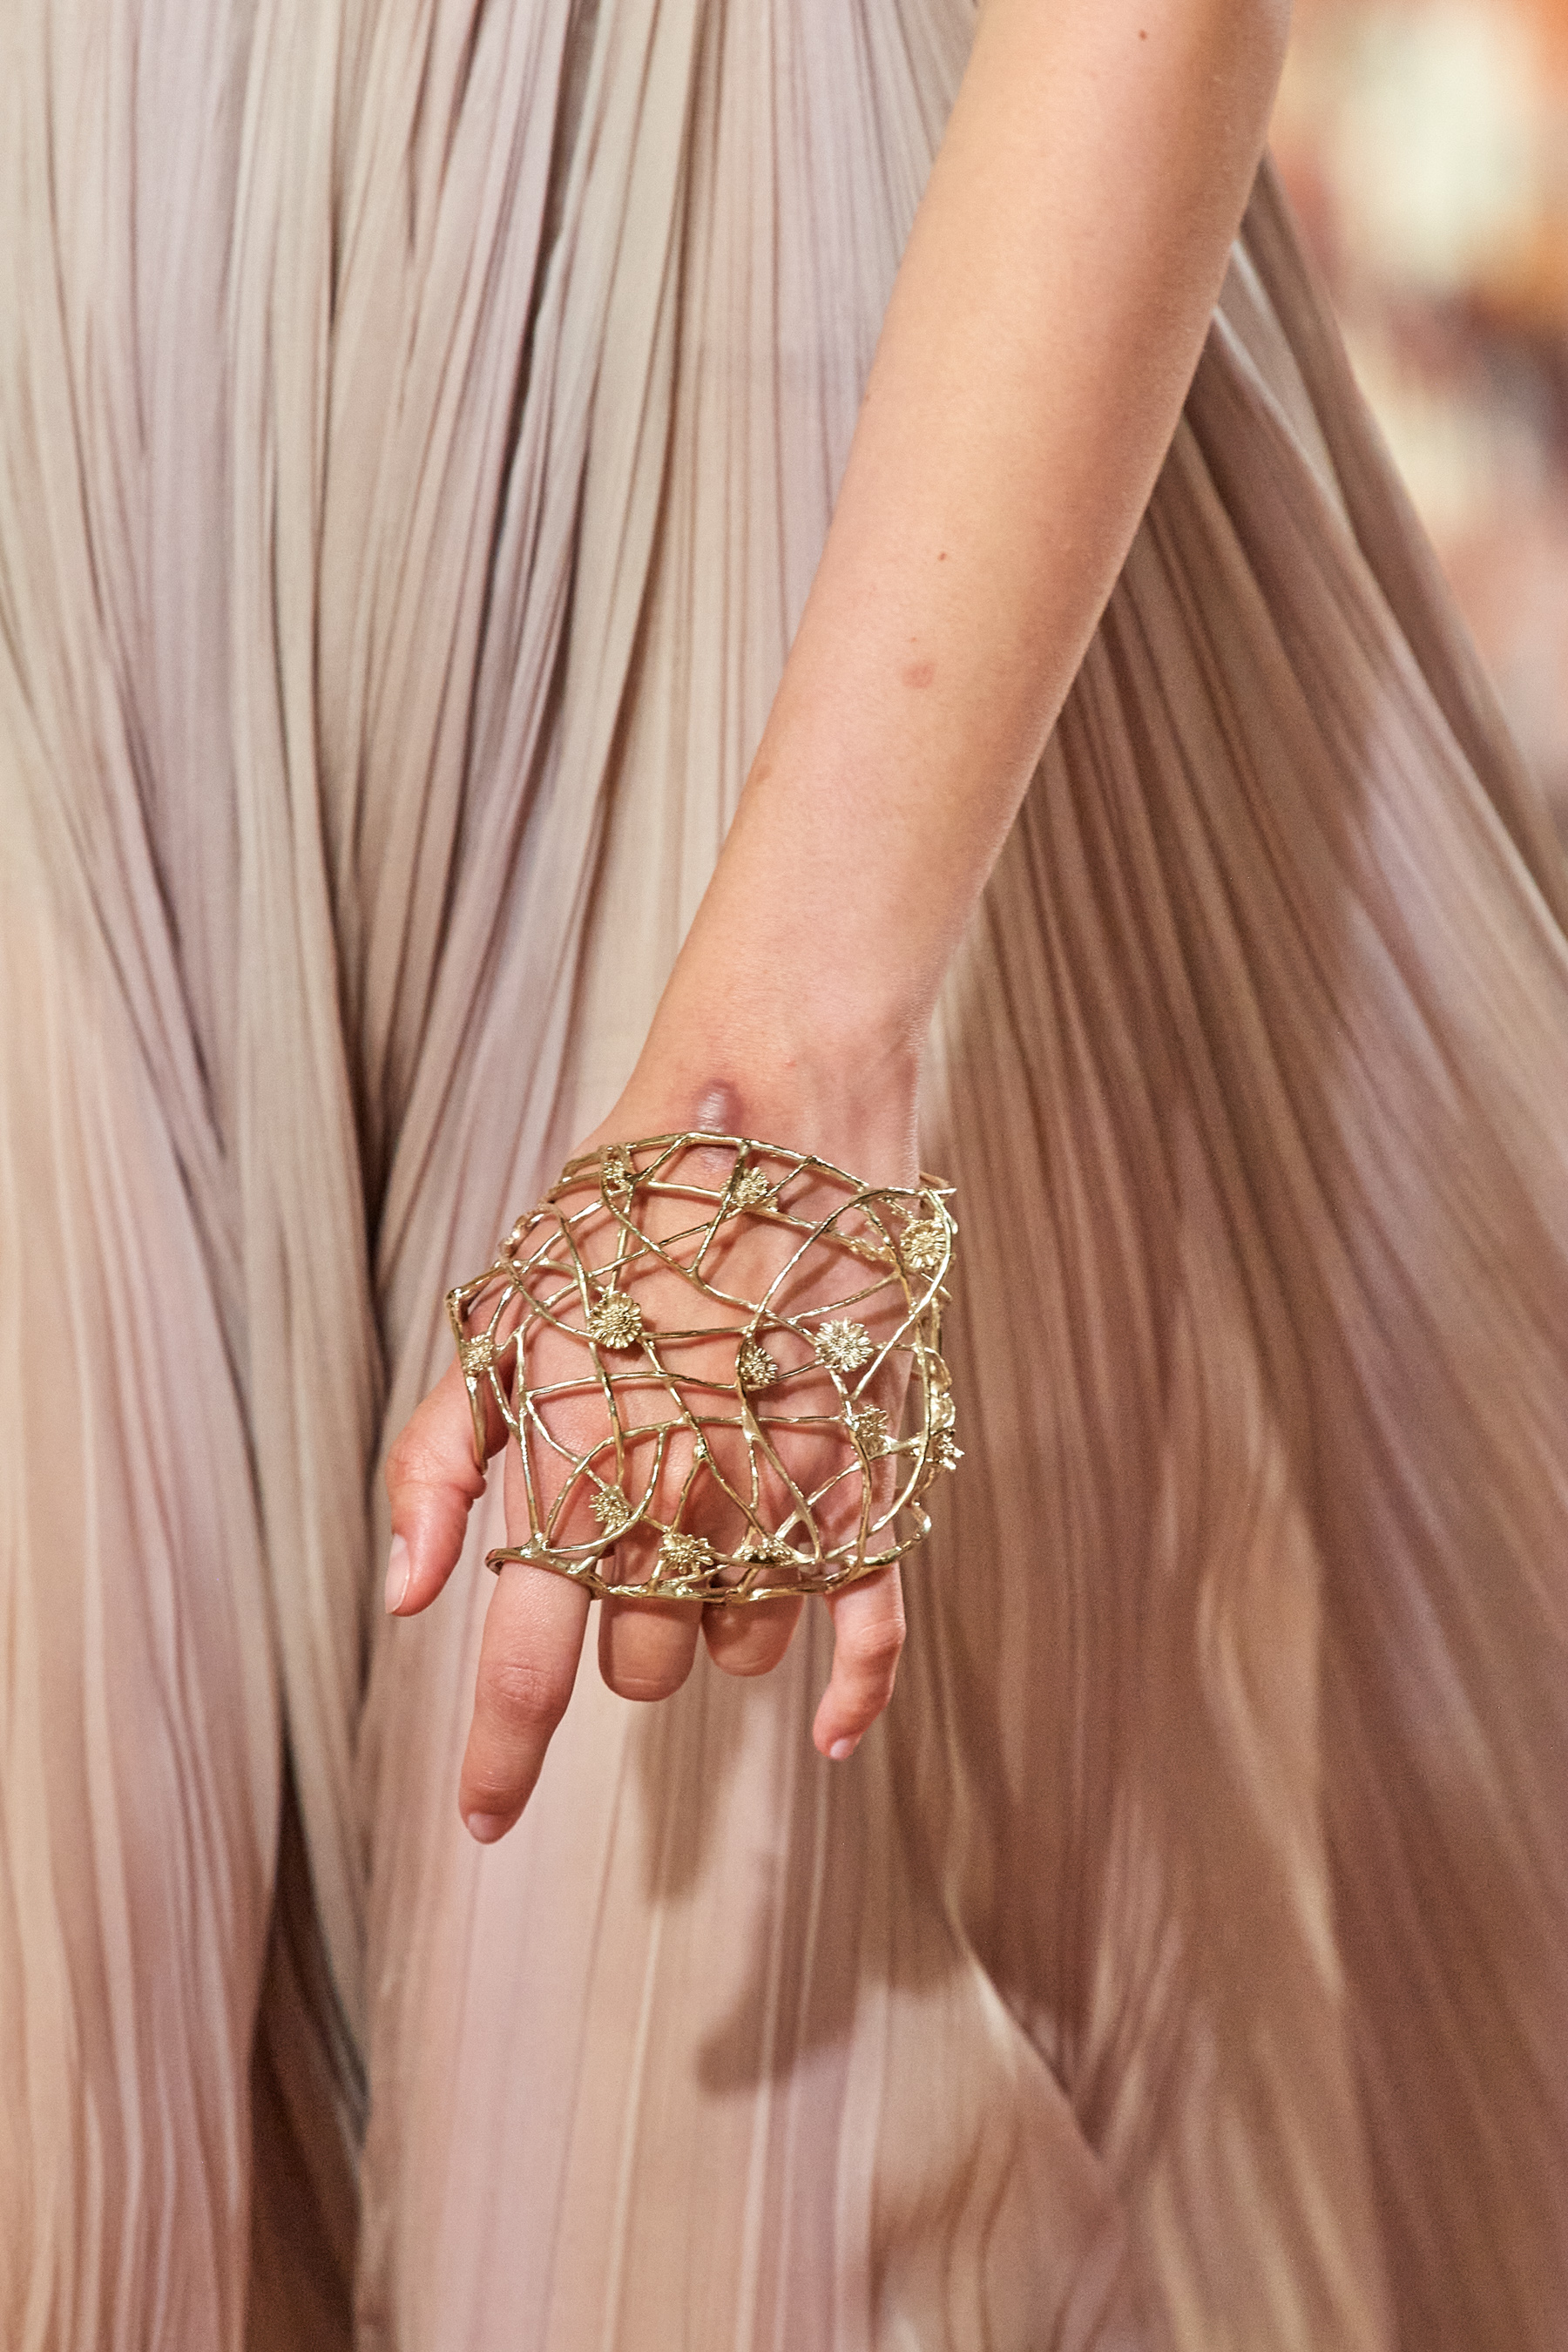 Christian Dior Fall 2021 Couture Details Fashion Show | The Impression